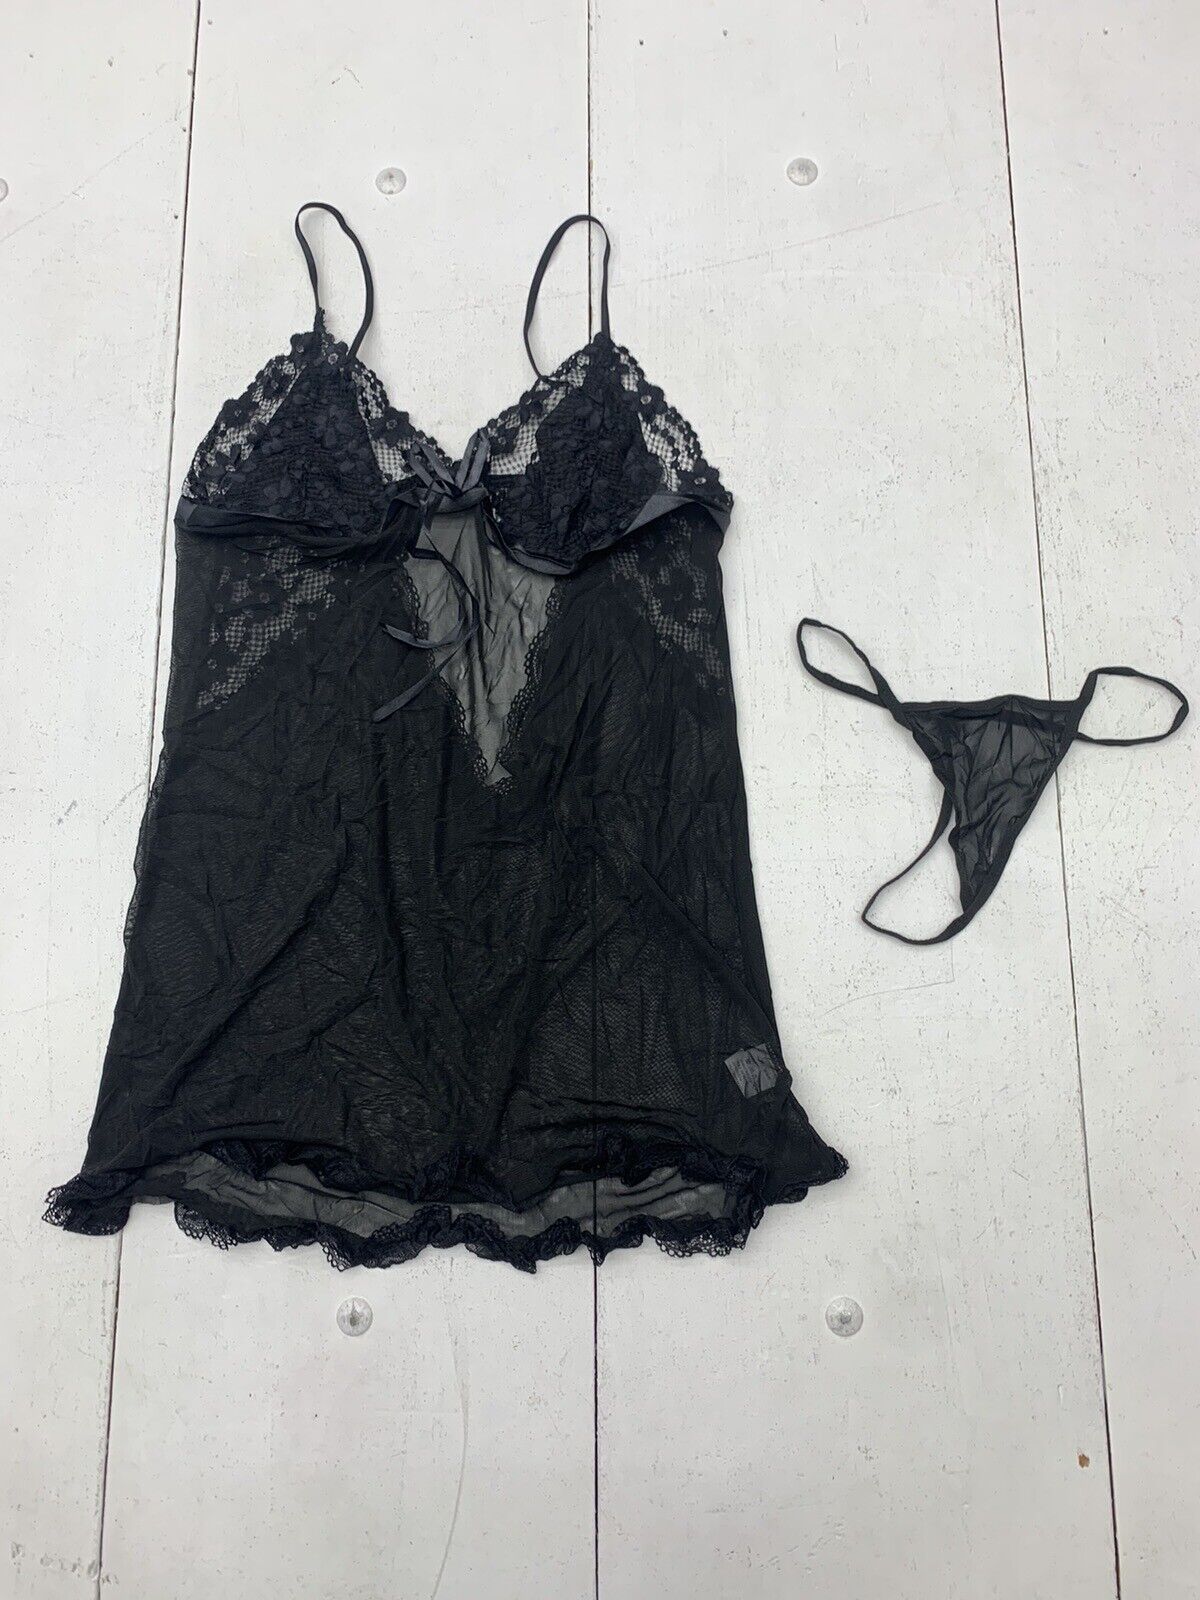 Womens Sheer Black Lace Lingerie Size Small